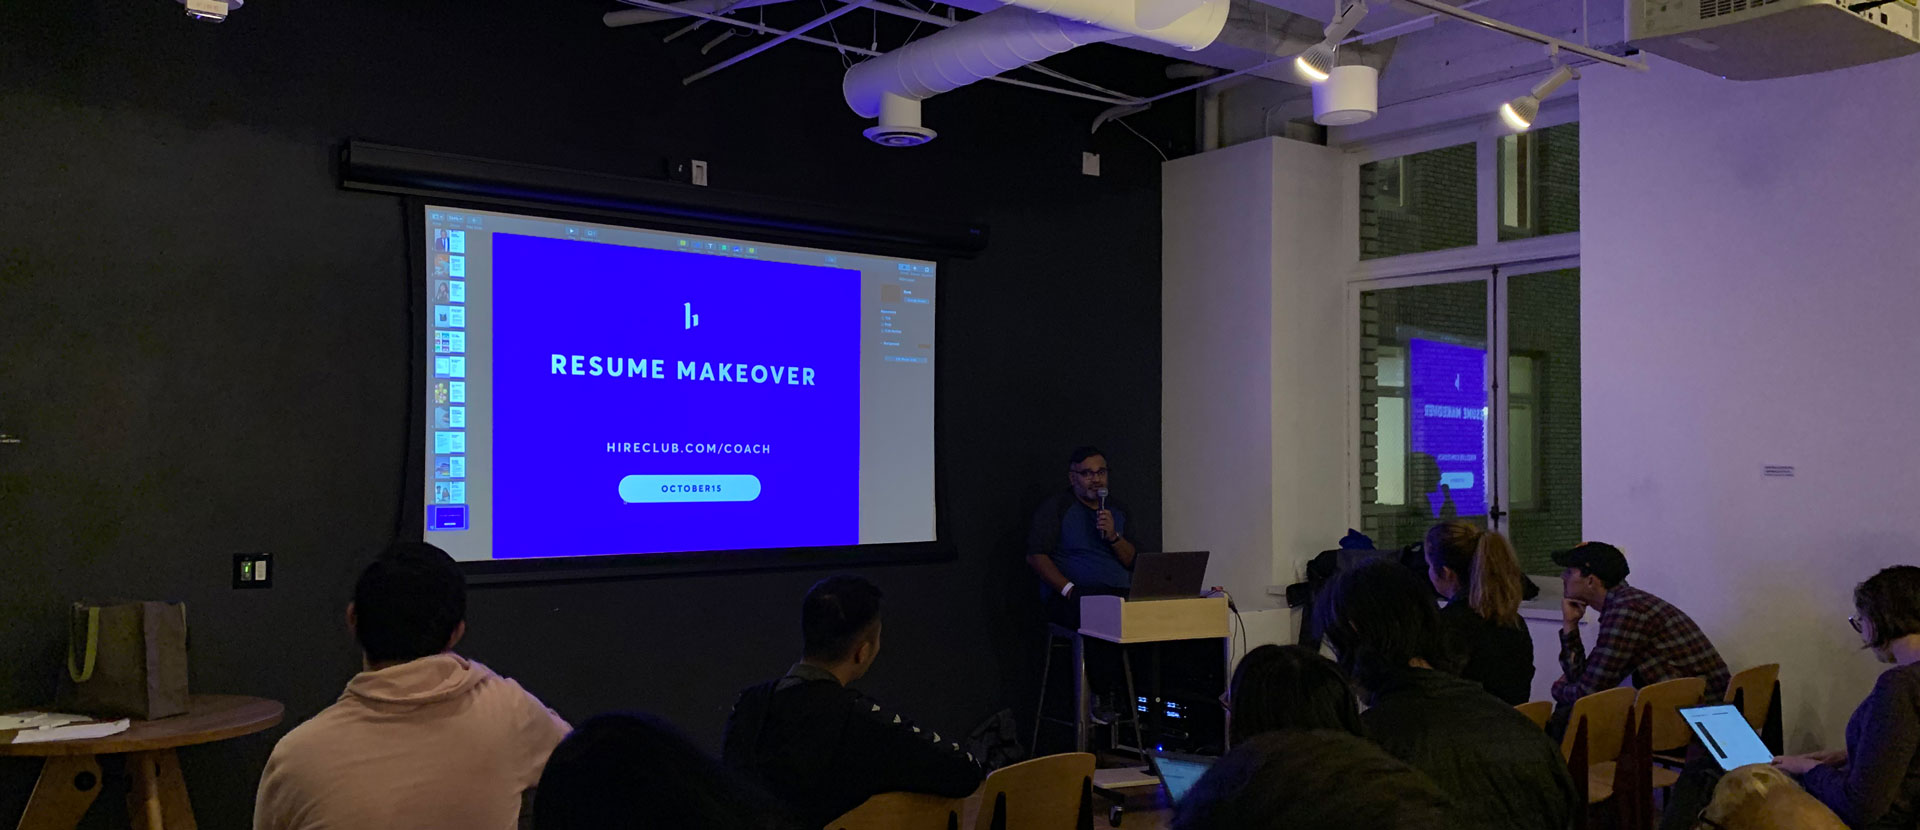 Another HireClub event hosted at General Assembly in San Francisco. I designed the pitch deck in Sketch and converted it into a PowerPoint for a Resume Makeover event.